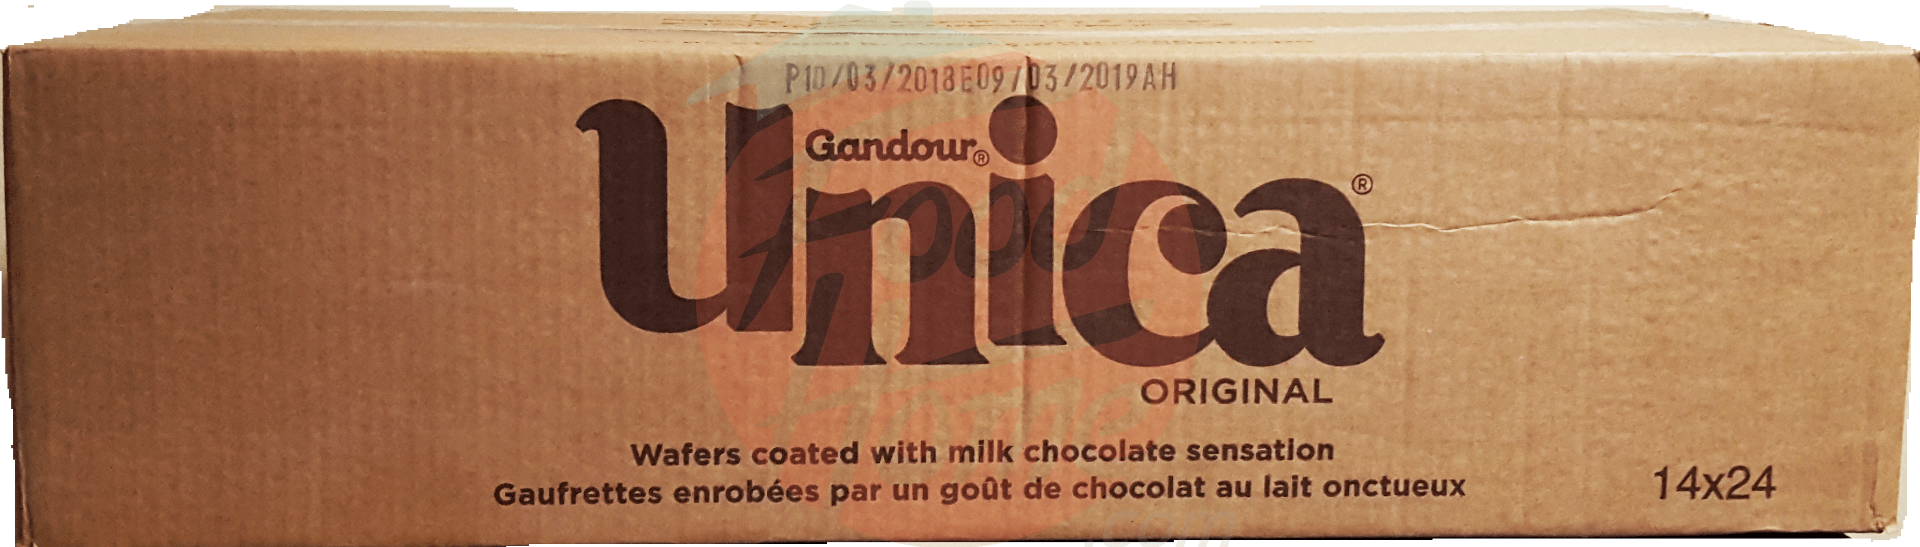 Unica Gandour wafers coated with milk chocolate bar 14-cases, 24-bars/case 24g Wrapper